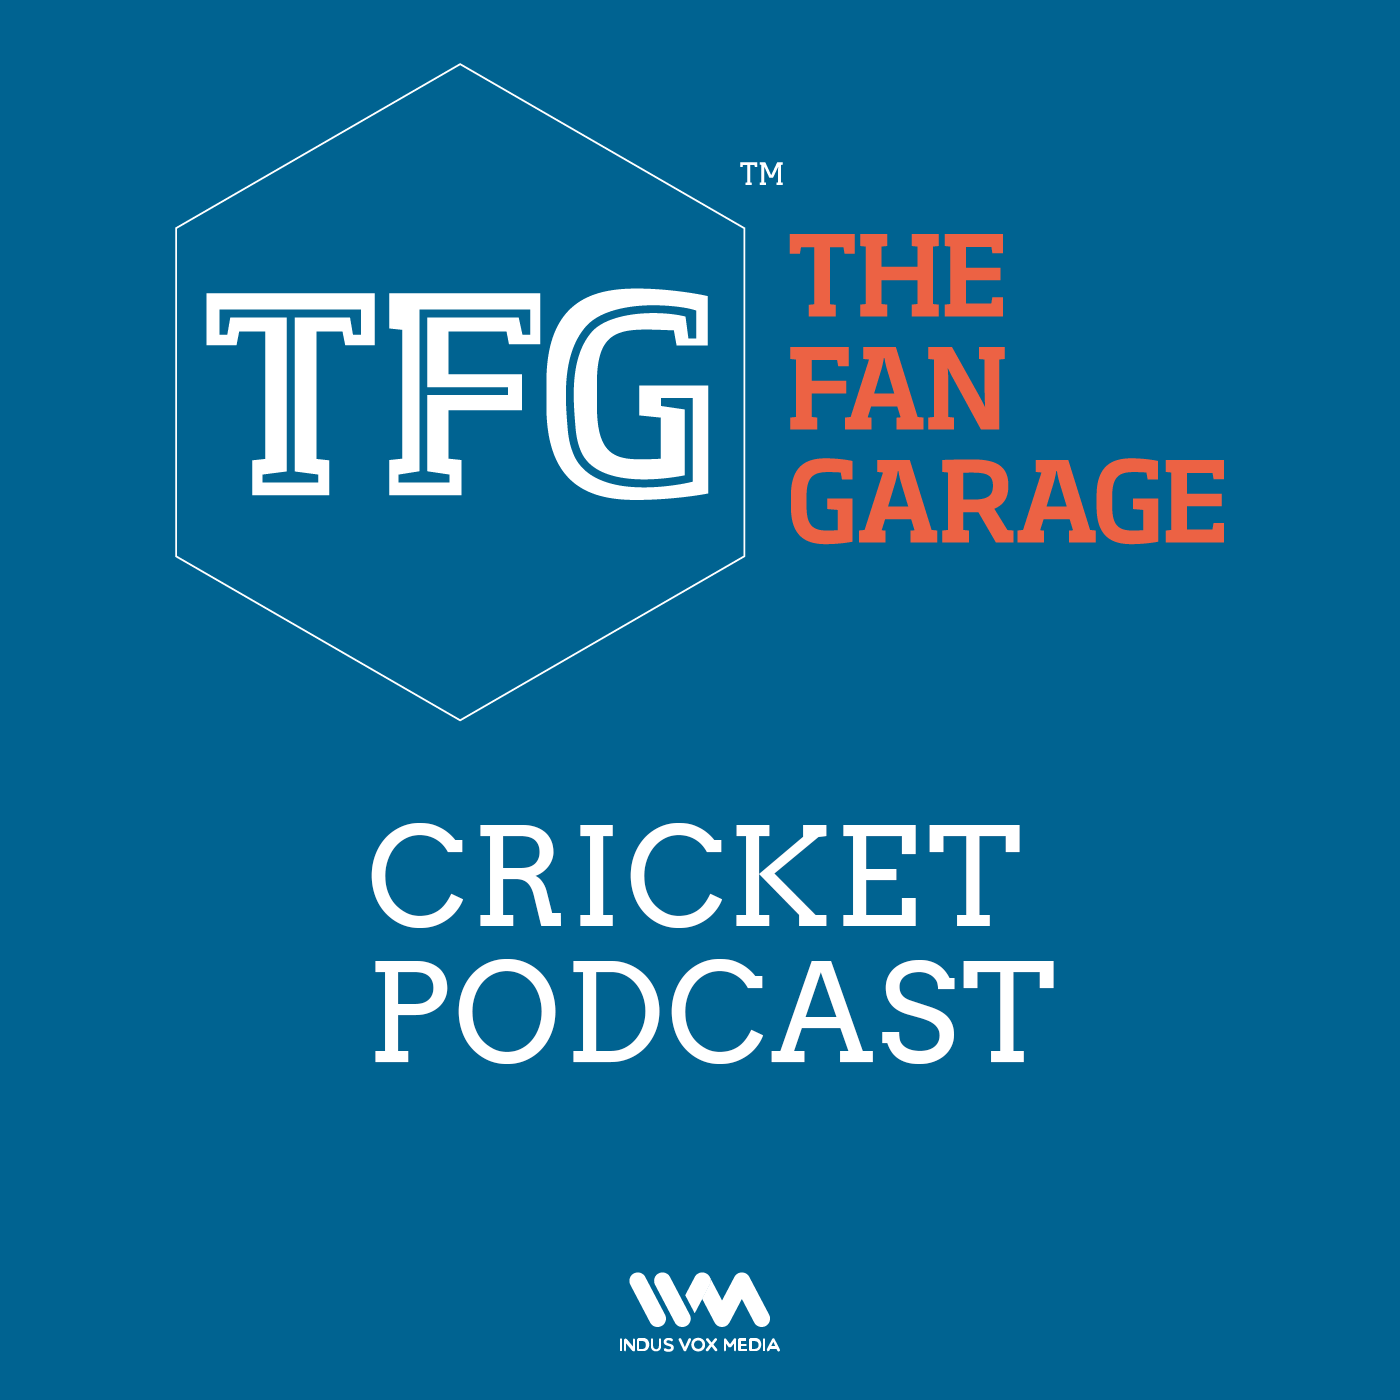 TFG Cricket Ep. 030: Toss to Decide Outcome of Ind v Aus Tests